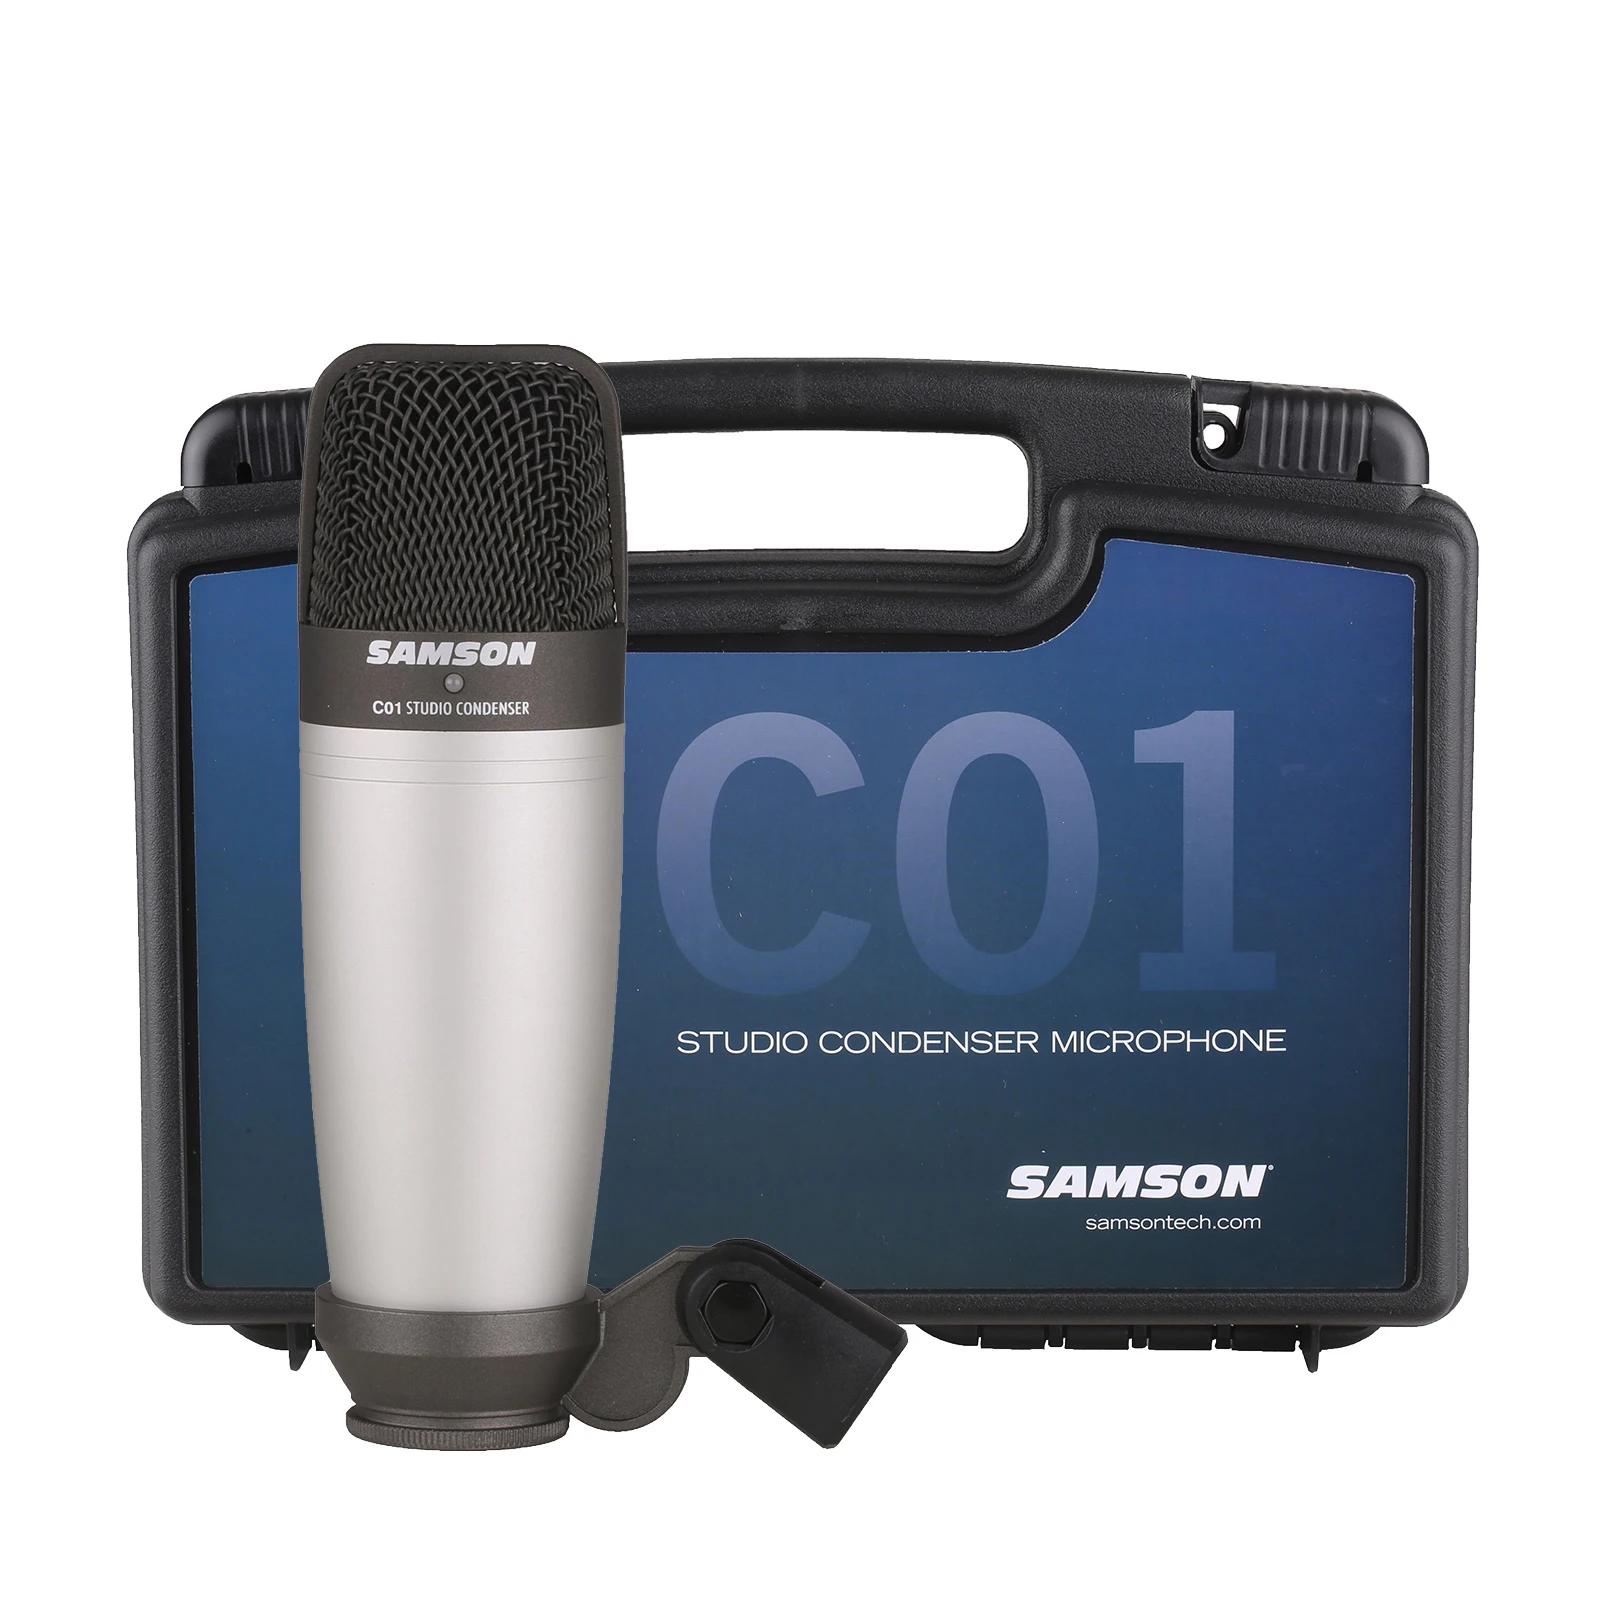 

SAMSON C01 Large-Diaphragm Cardioid Condenser XLR Microphone Professional Studio Mic Plastic Carry Case for Streaming Podcasting